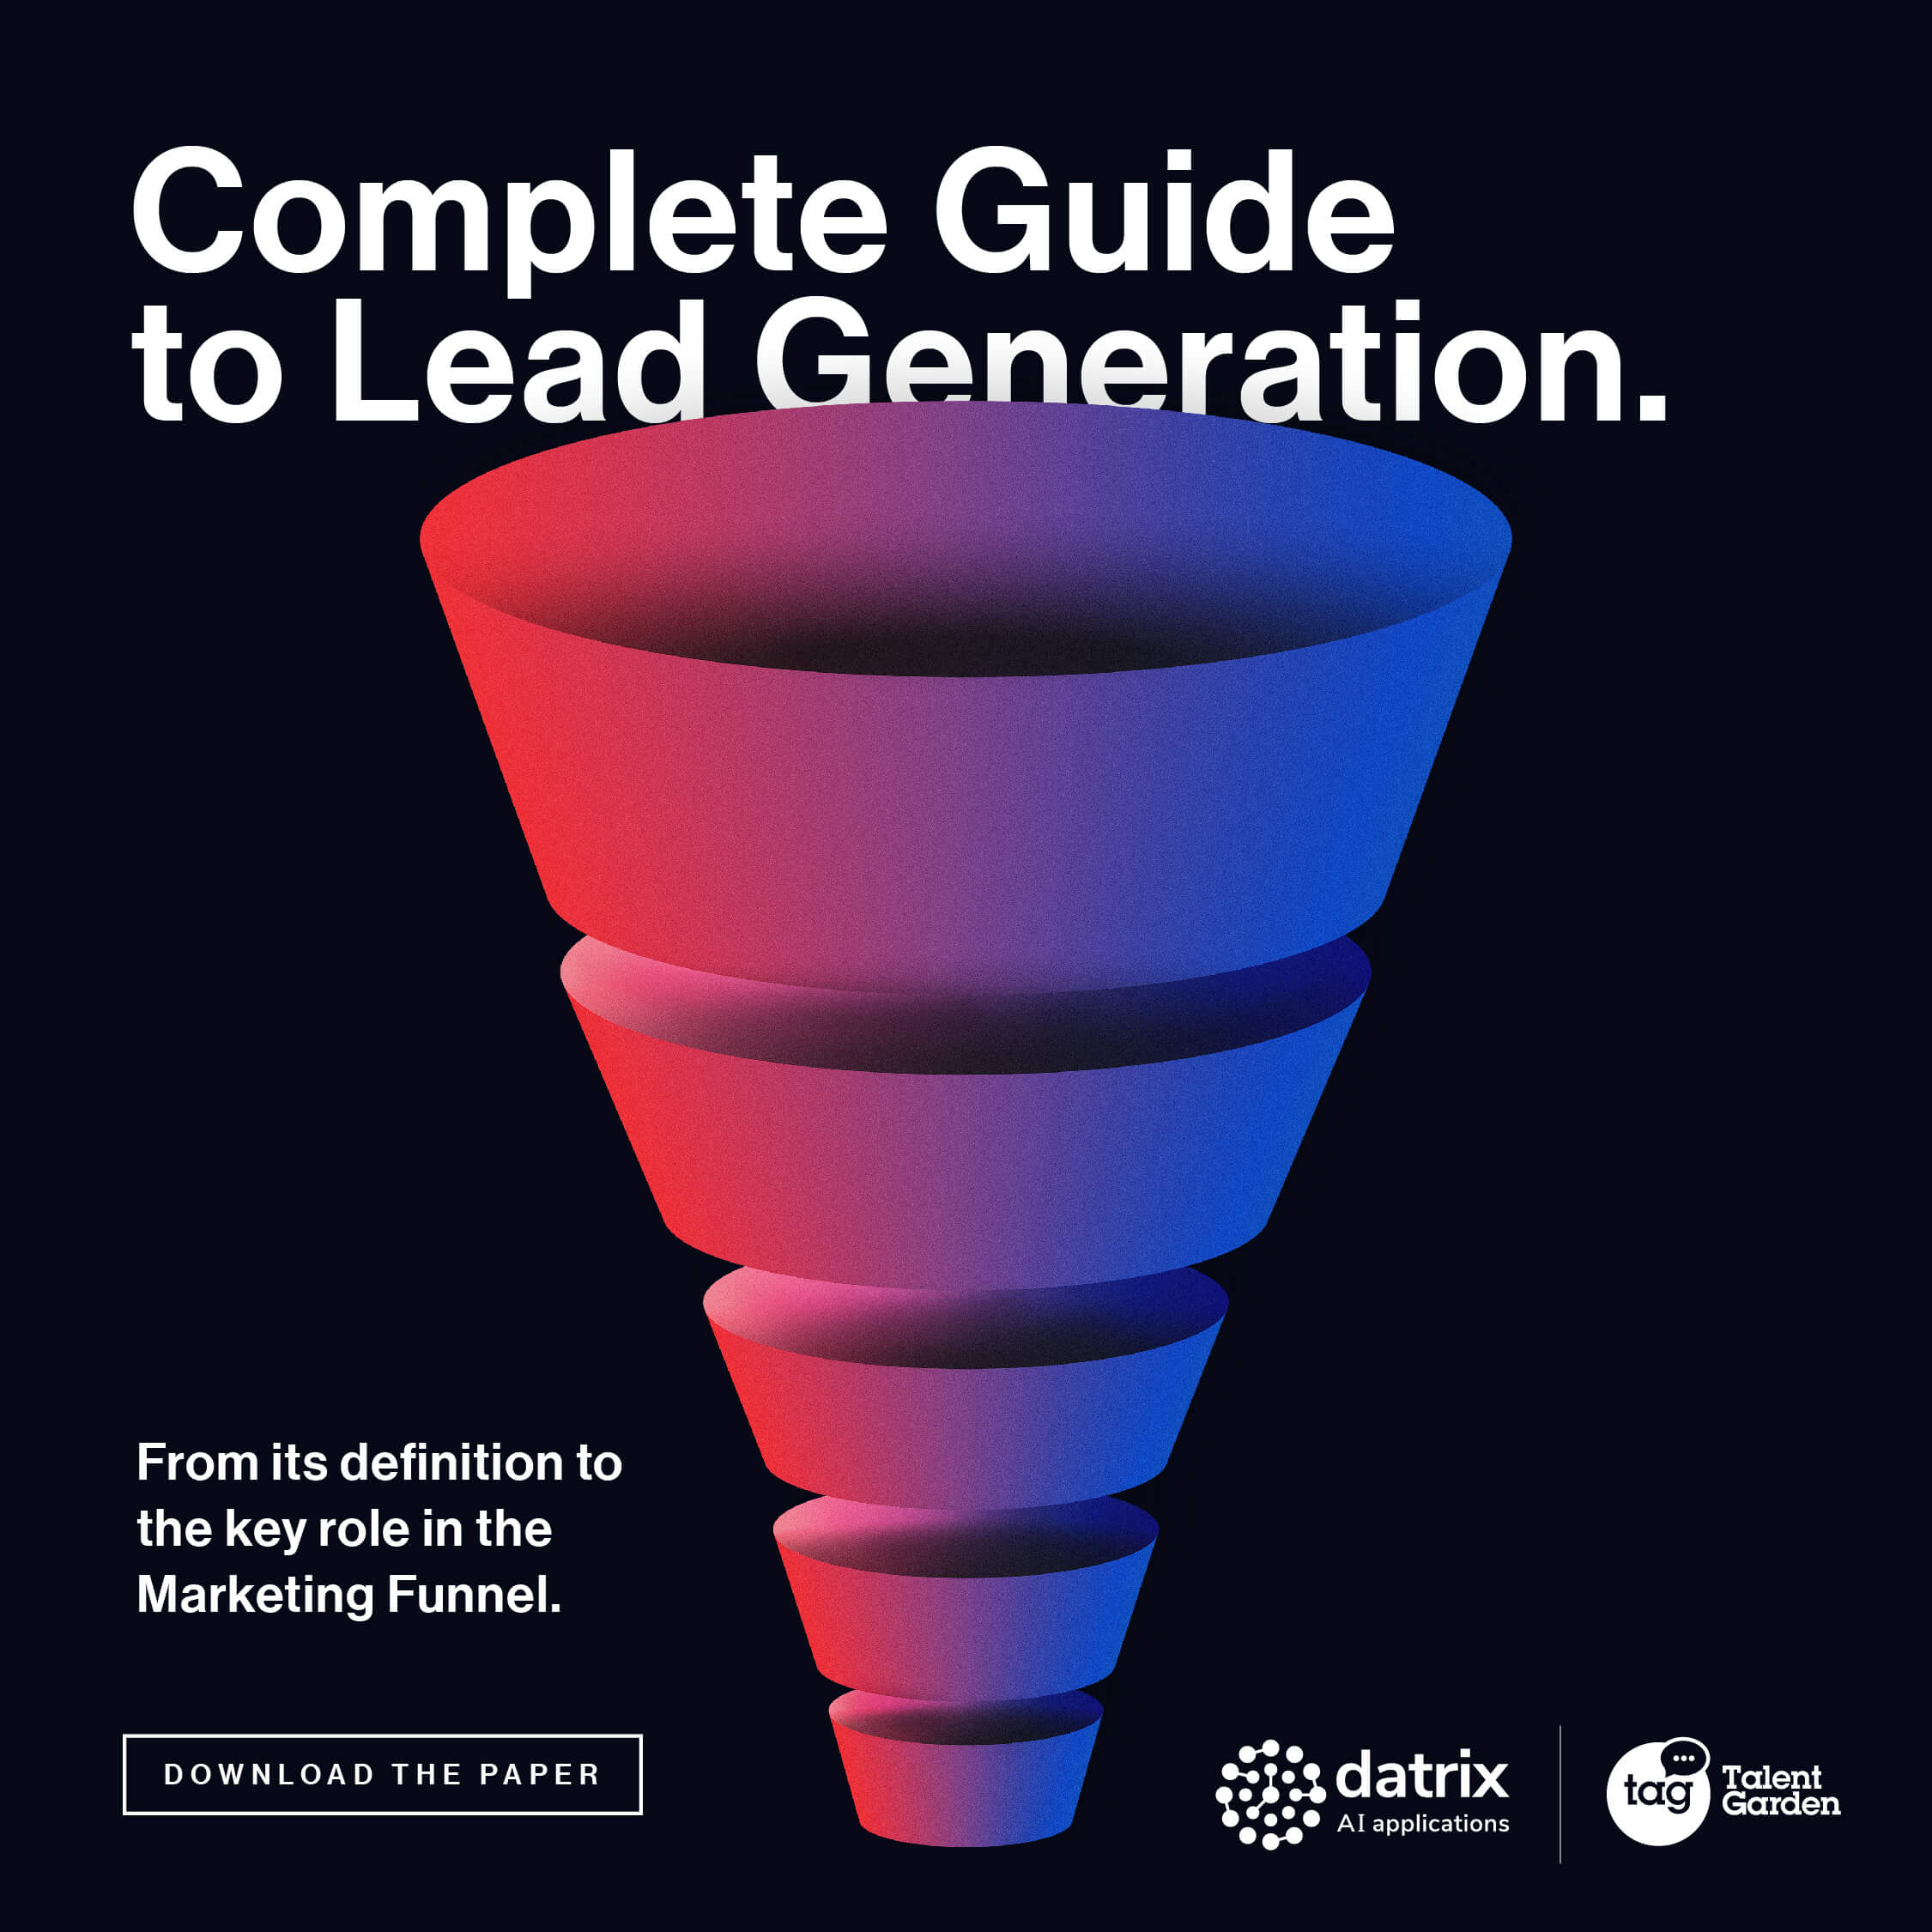 The Complete Guide to Lead Generation